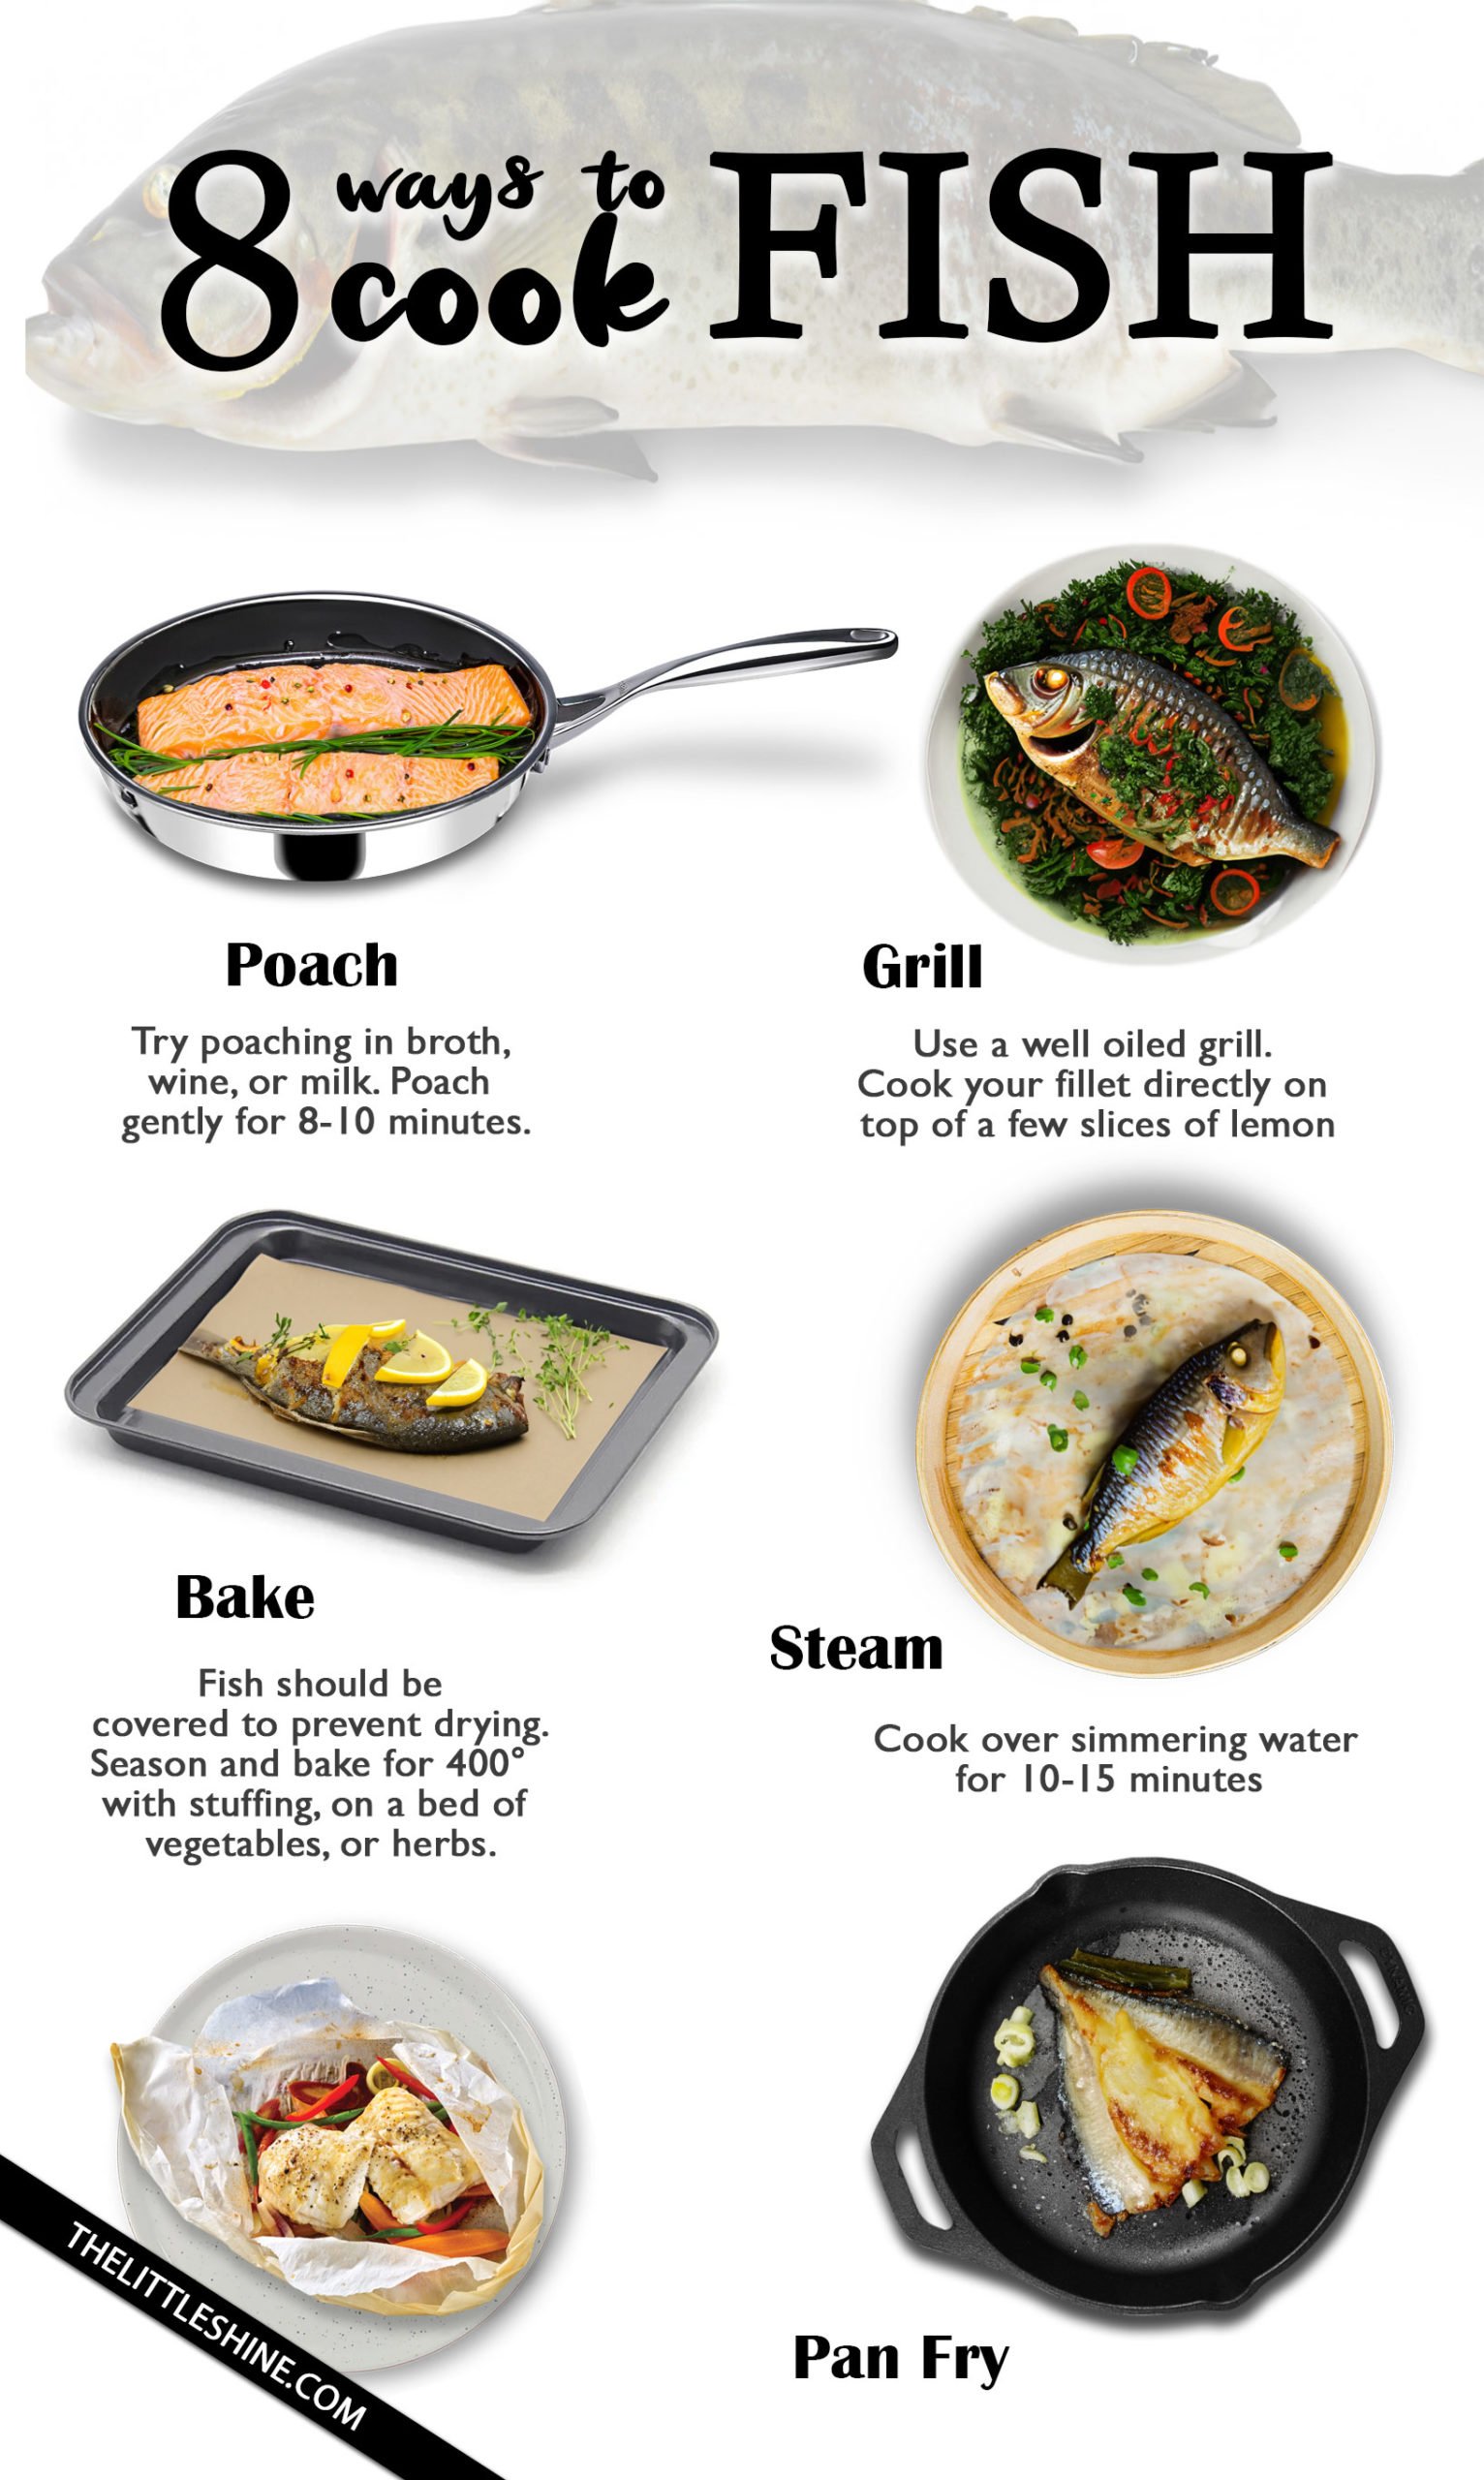 8 Simple ways to cook FISH